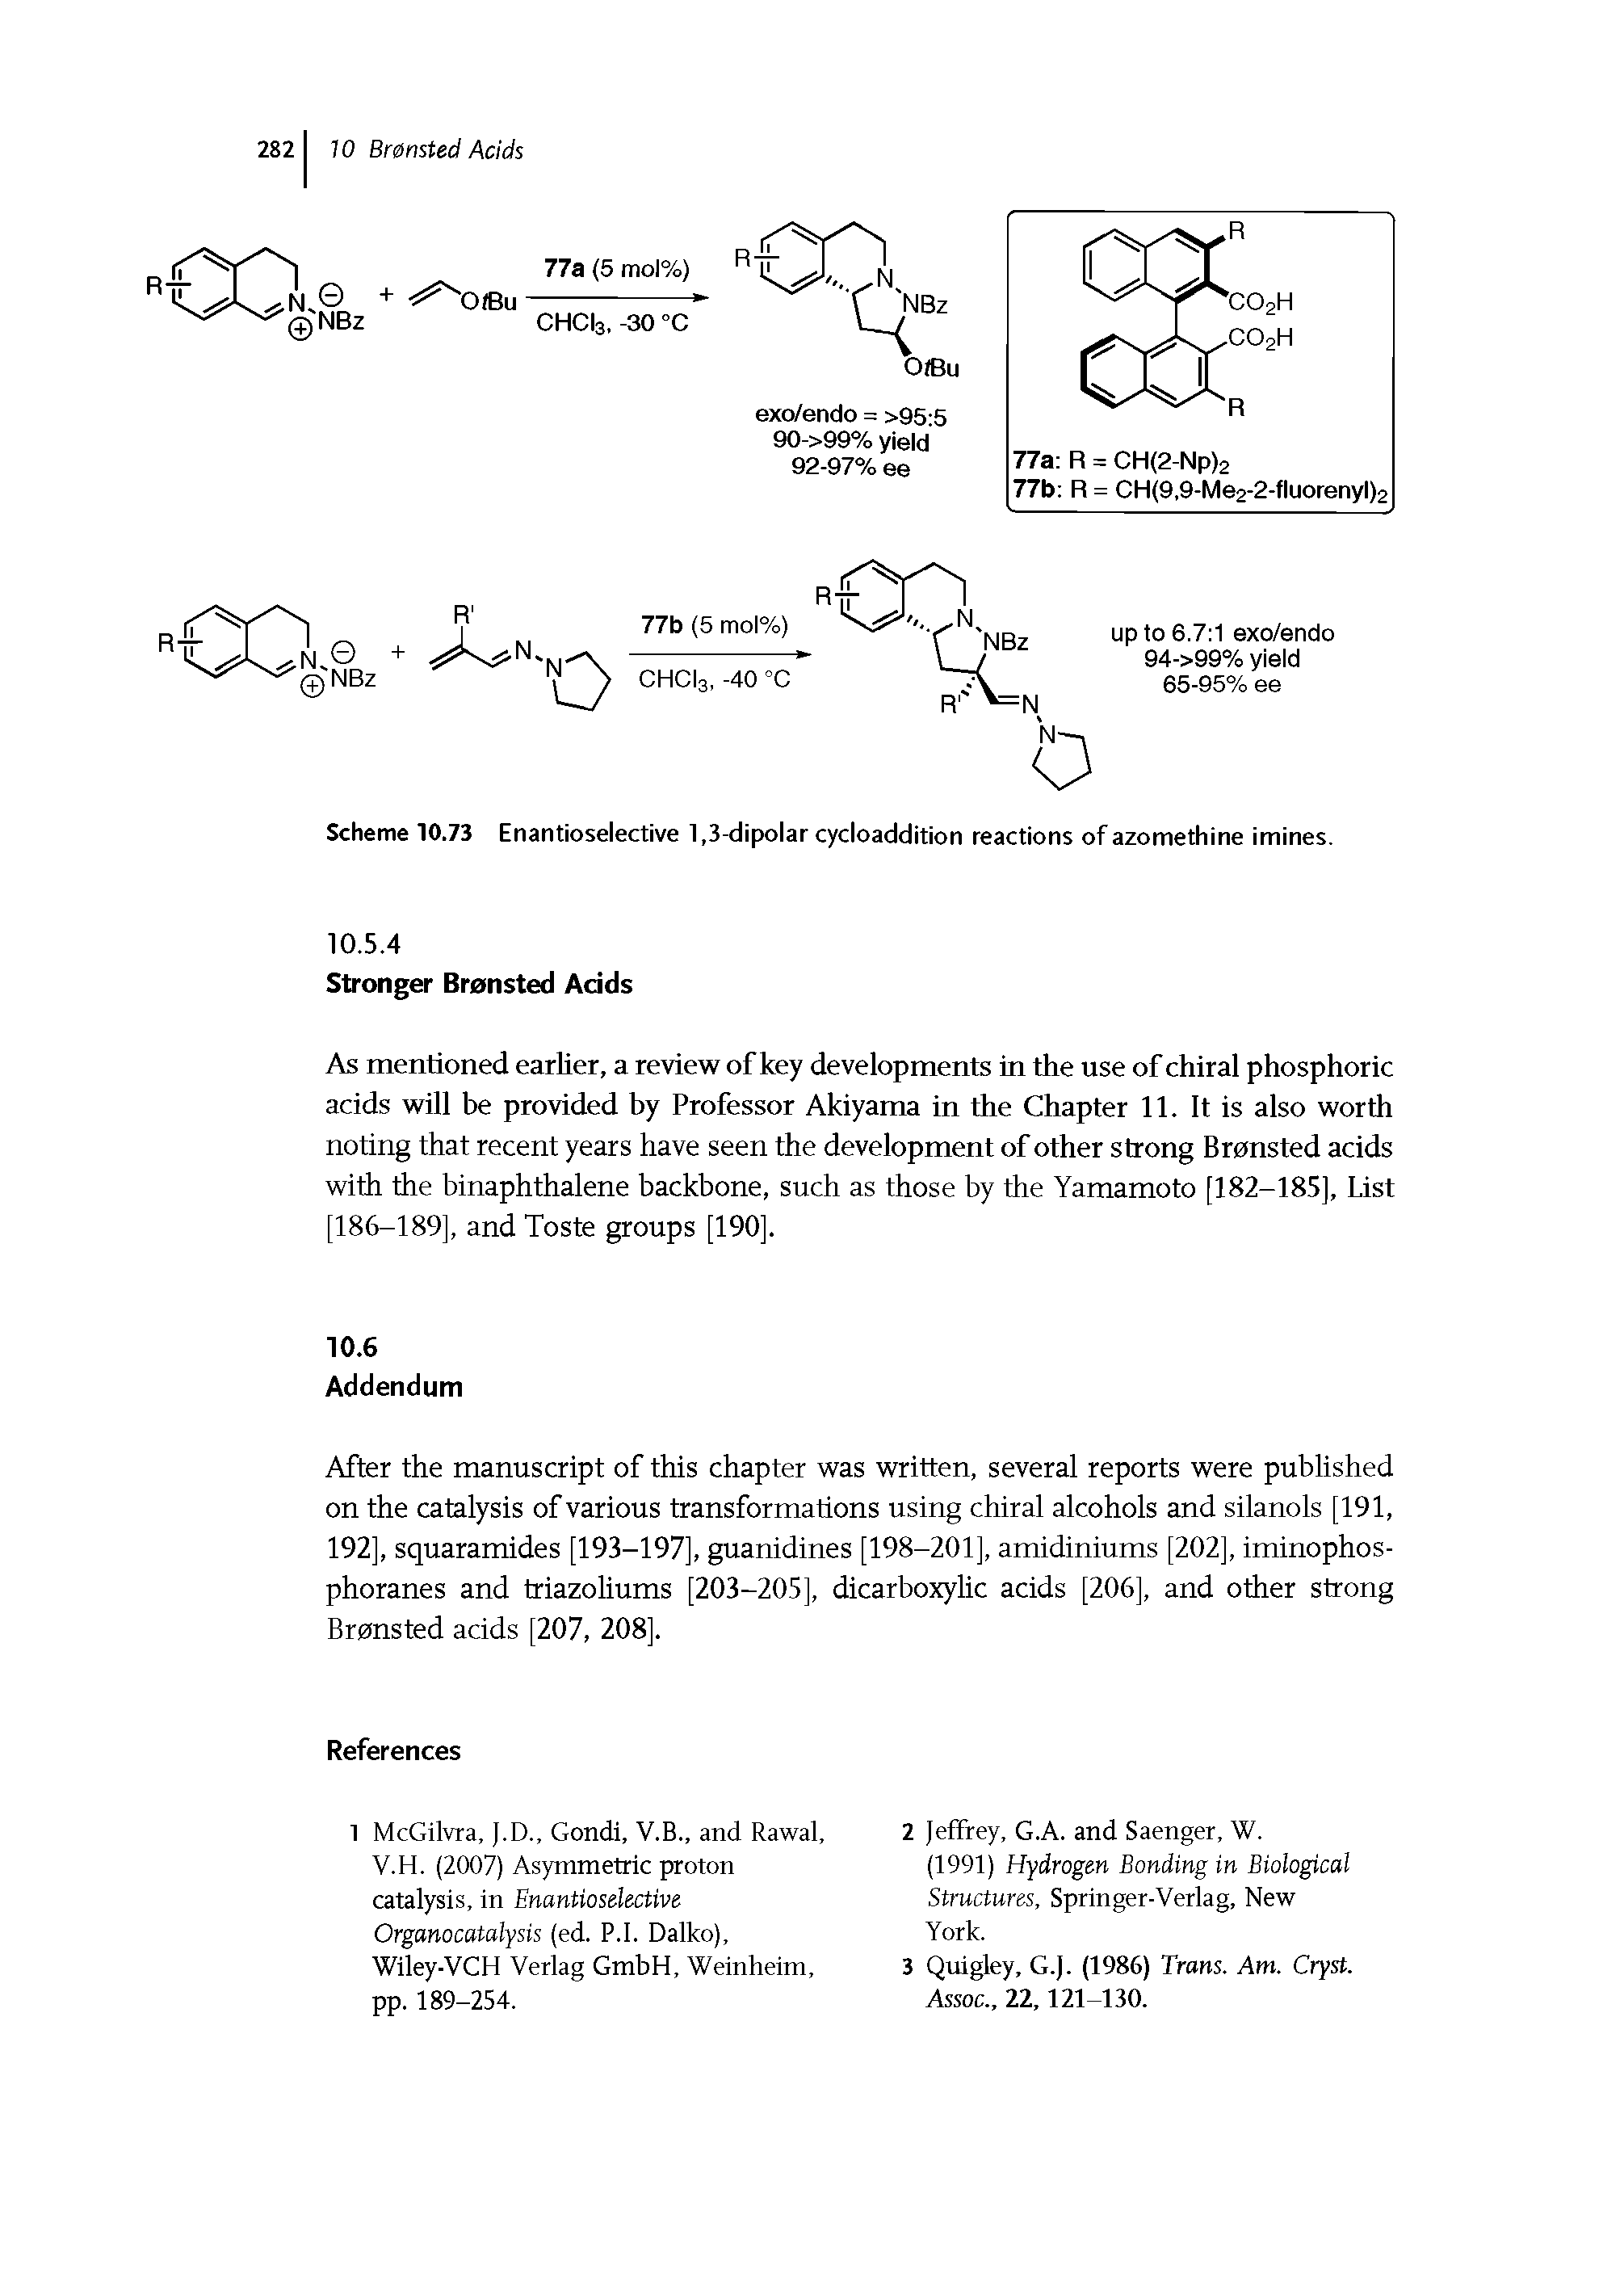 Scheme 10.73 Enantioselective 1,3-dipolar cycloaddition reactions of azomethine imines.